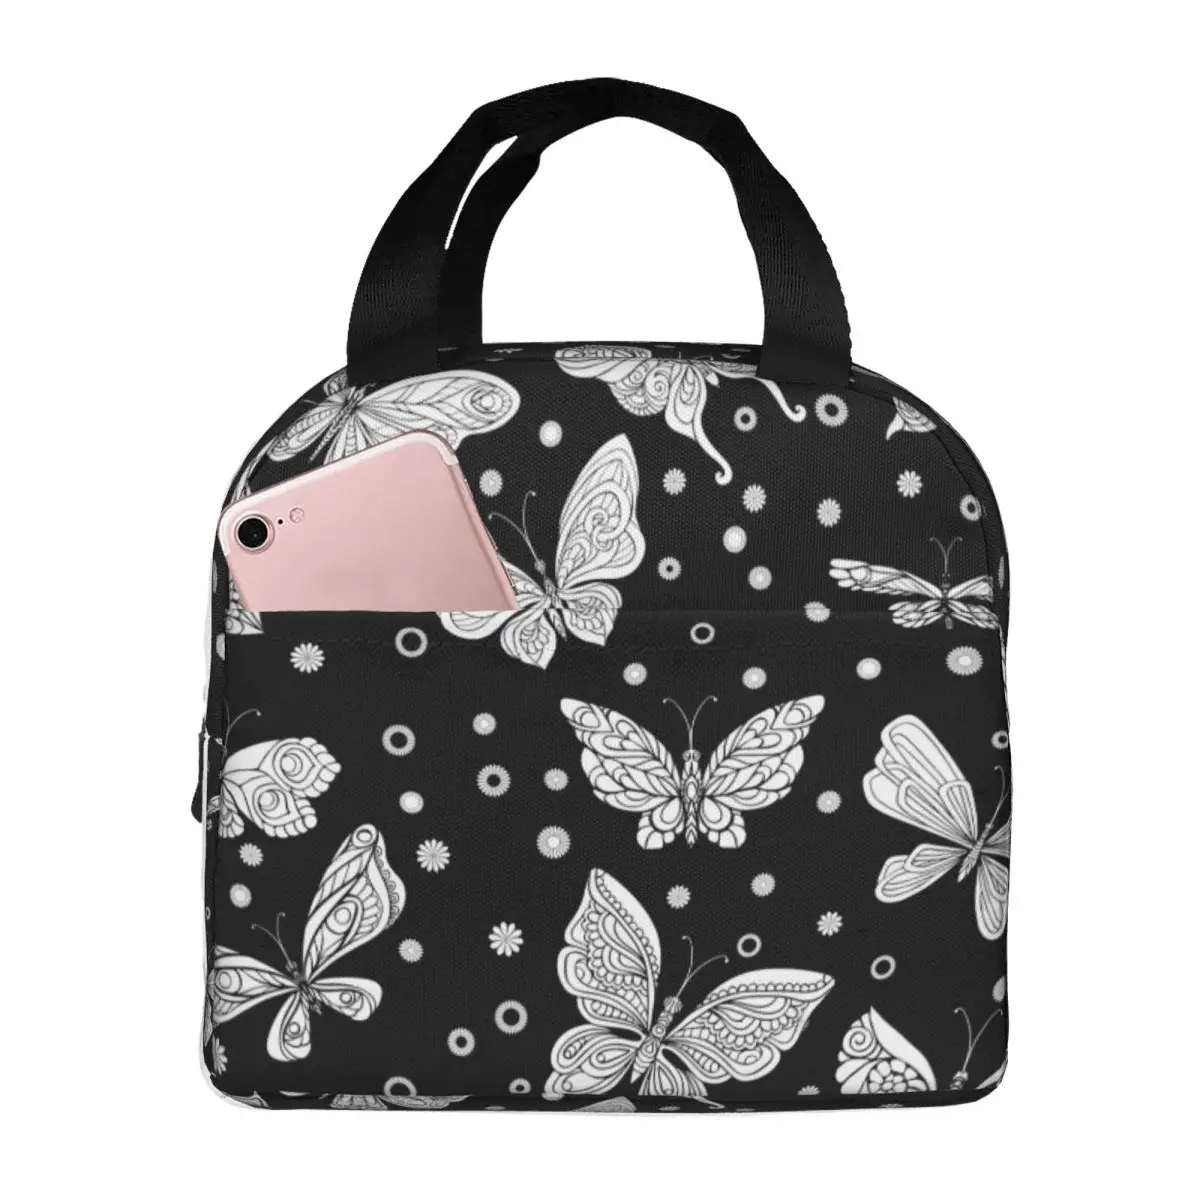 Lunch Bags for Women Kids Butterfly Thermal Cooler Waterproof Picnic Work Oxford Tote Food Bag